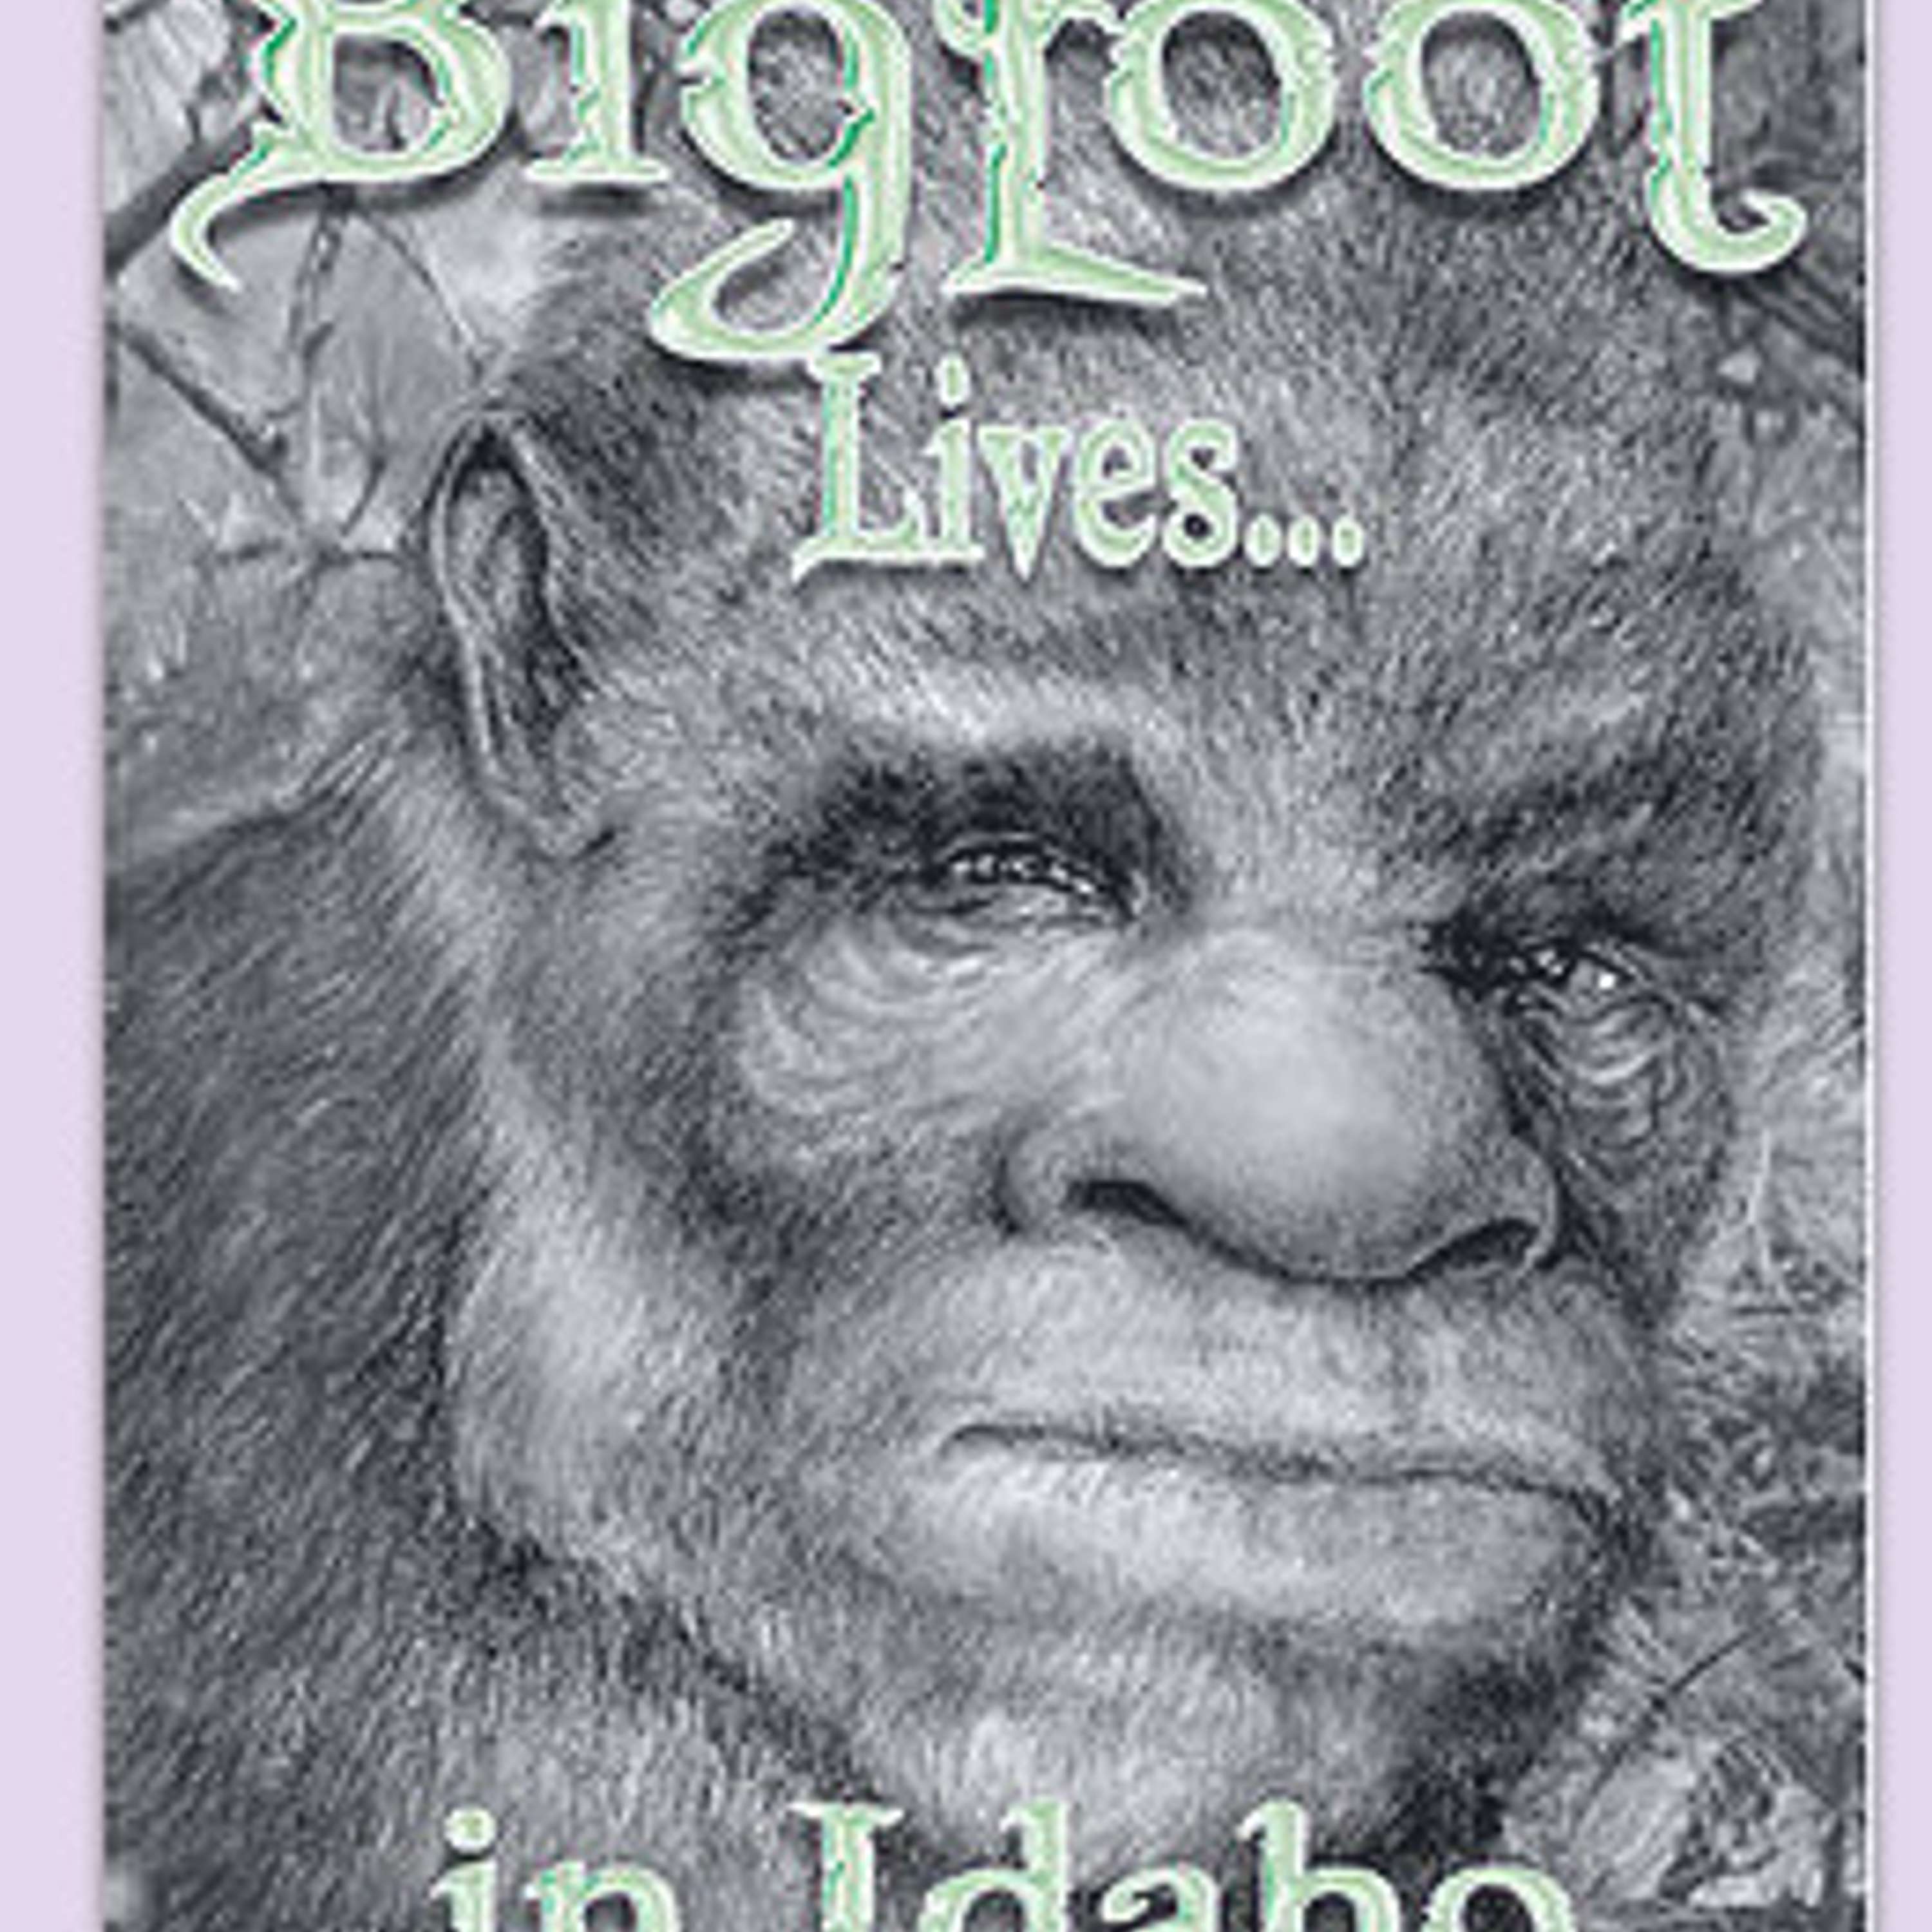 Trailer 1: Love At First Sight. ***PREMIERS FRIDAY 5/21/2021 9 PM EST*** Bigfoot in Idaho with Special Guest Award-Winning Author Becky Cook Part 1 ***PREMIERS FRIDAY 5/21/2021 9 PM EST***